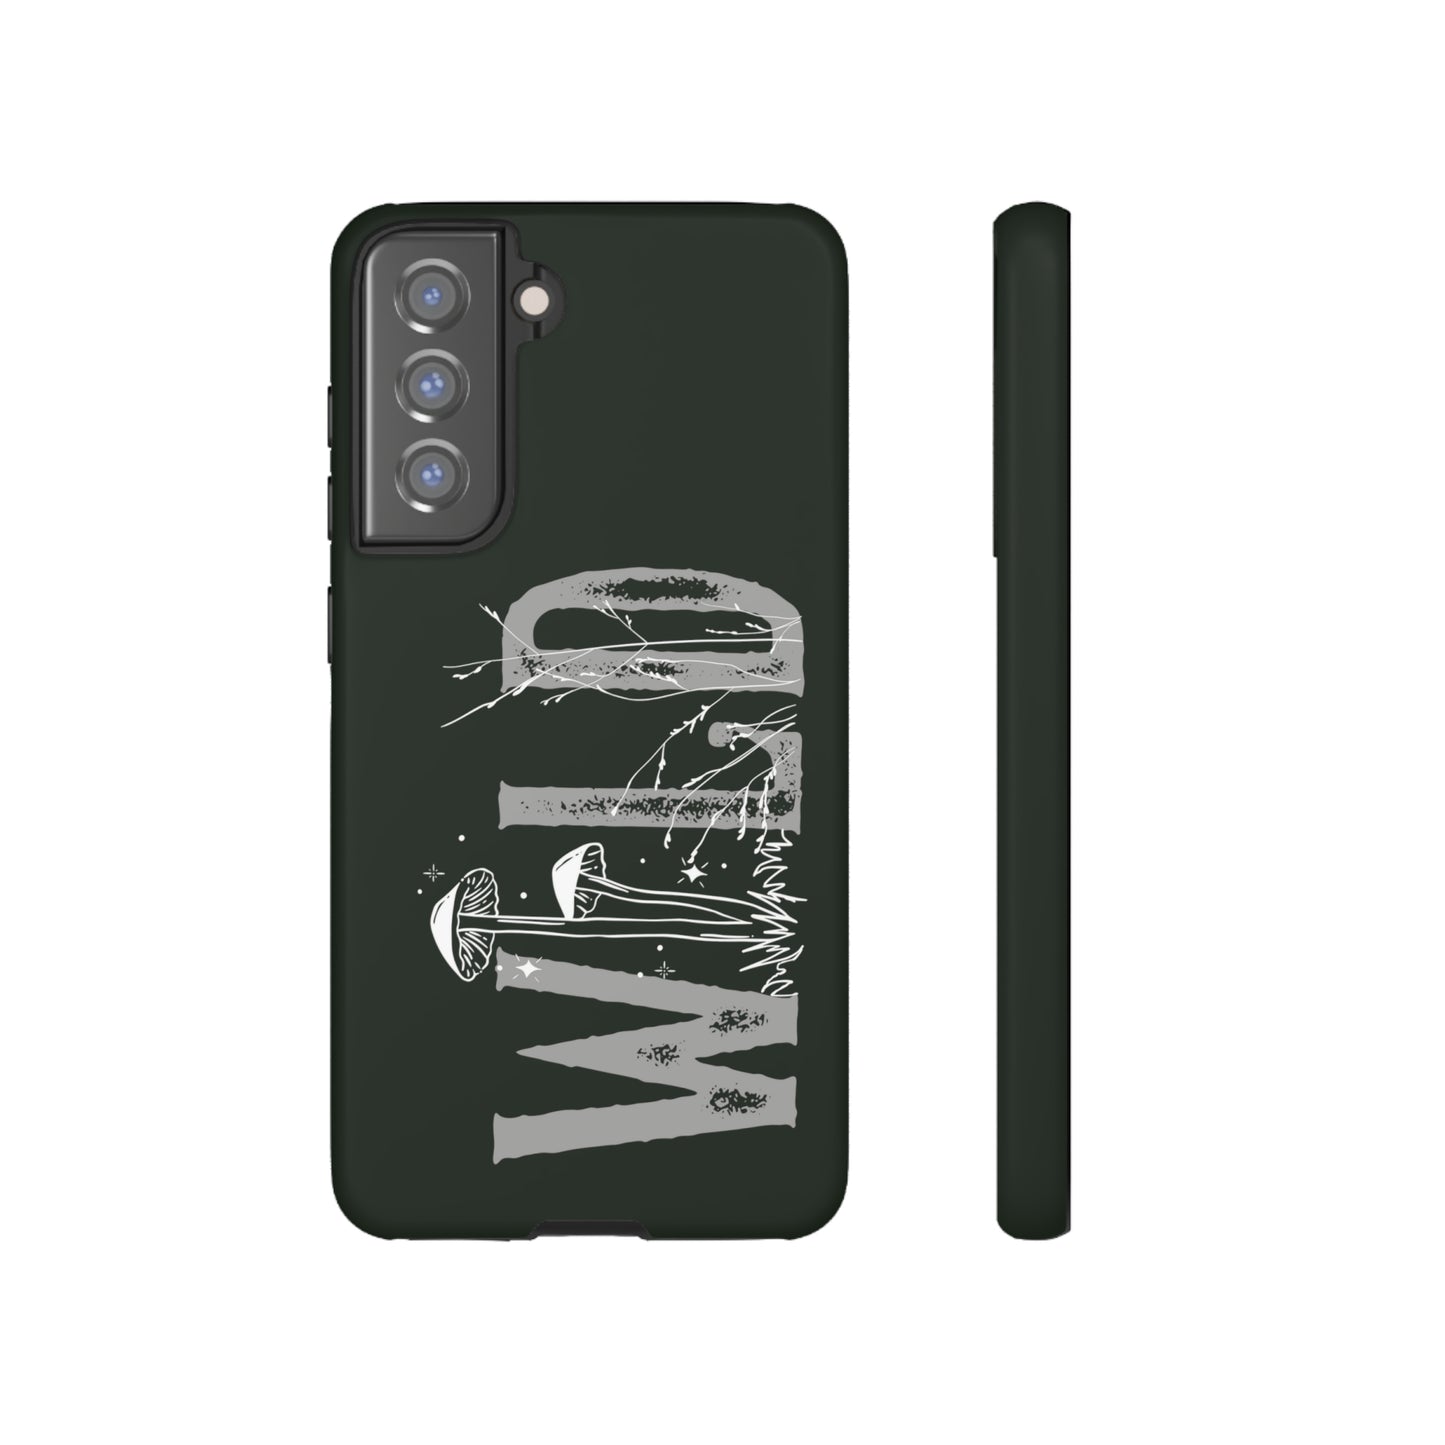 Wild Mushroom Phone Case for iPhones and Androids